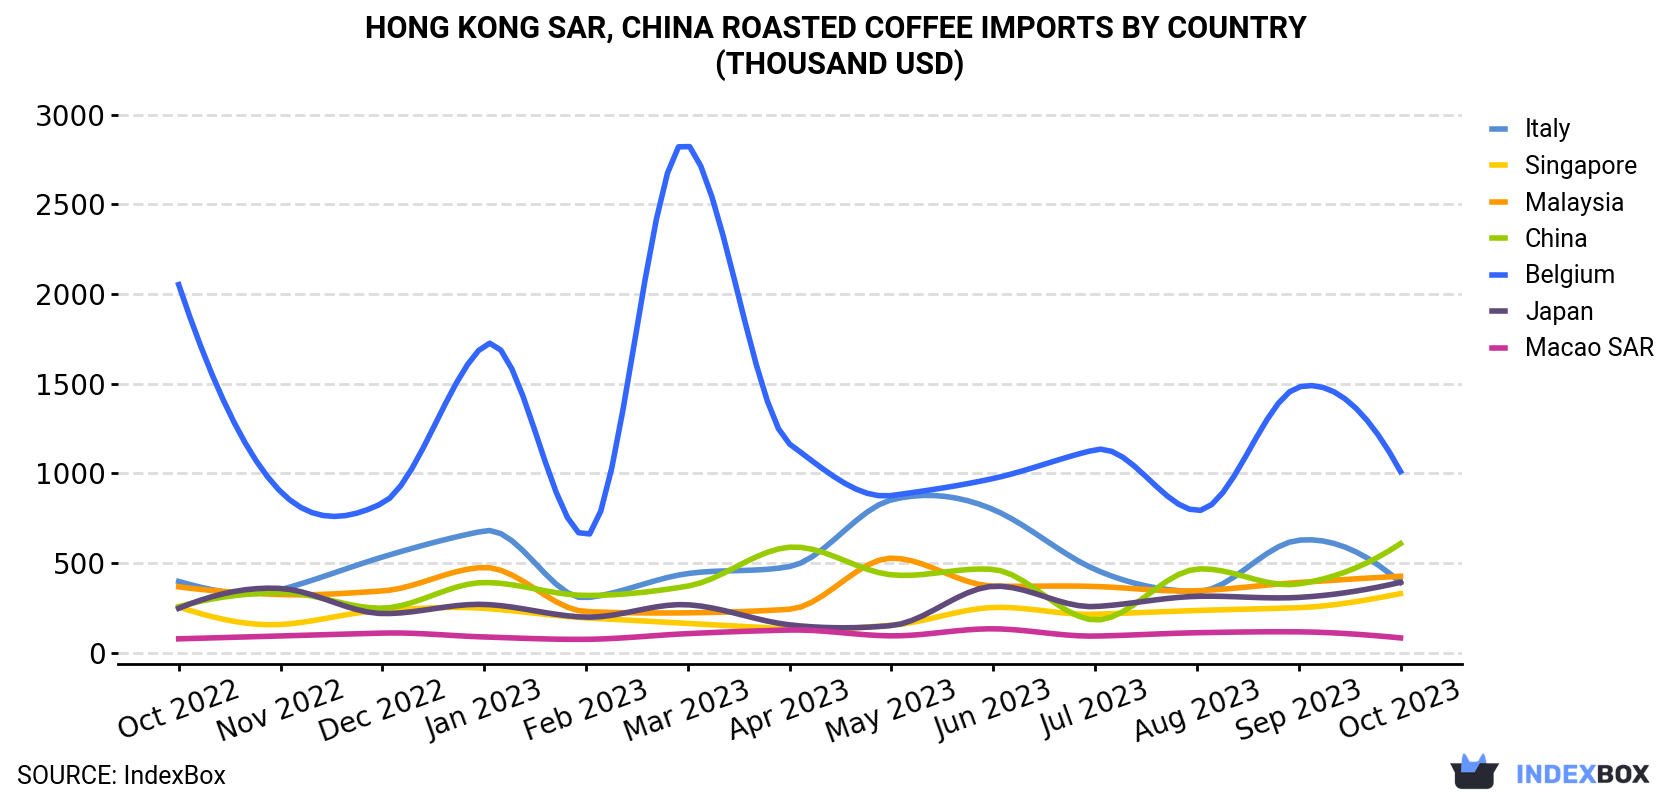 Hong Kong Roasted Coffee Imports By Country (Thousand USD)